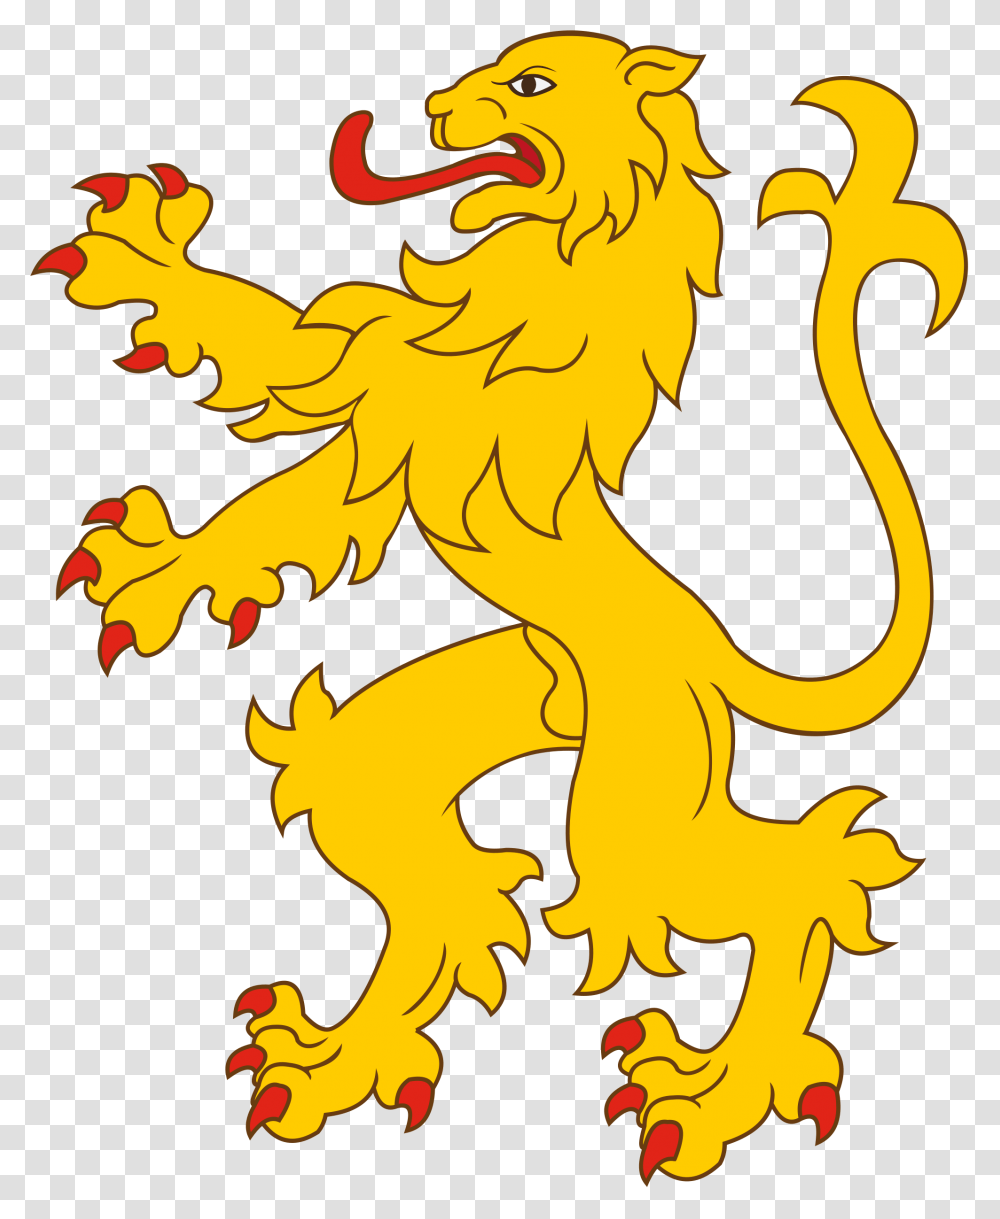 Coat Of Arms Lion Graphic Library Lion Coat Of Arms, Dragon, Animal, Emblem Transparent Png